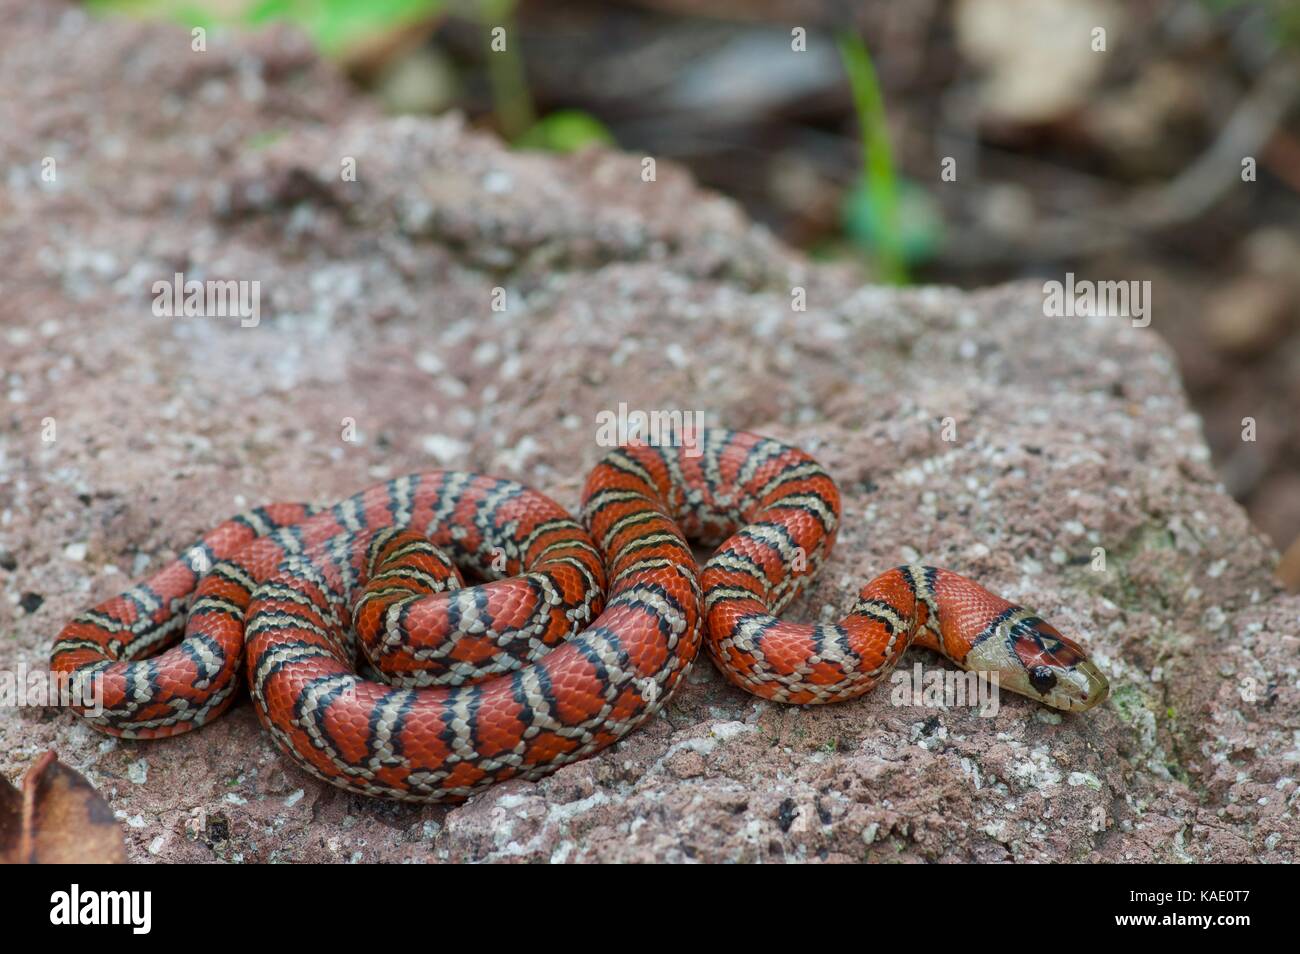 A Knobloch's Mountain Kingsnake (Lampropeltis knoblochi) resting on a rock near Yecora, Sonora, Mexico Stock Photo